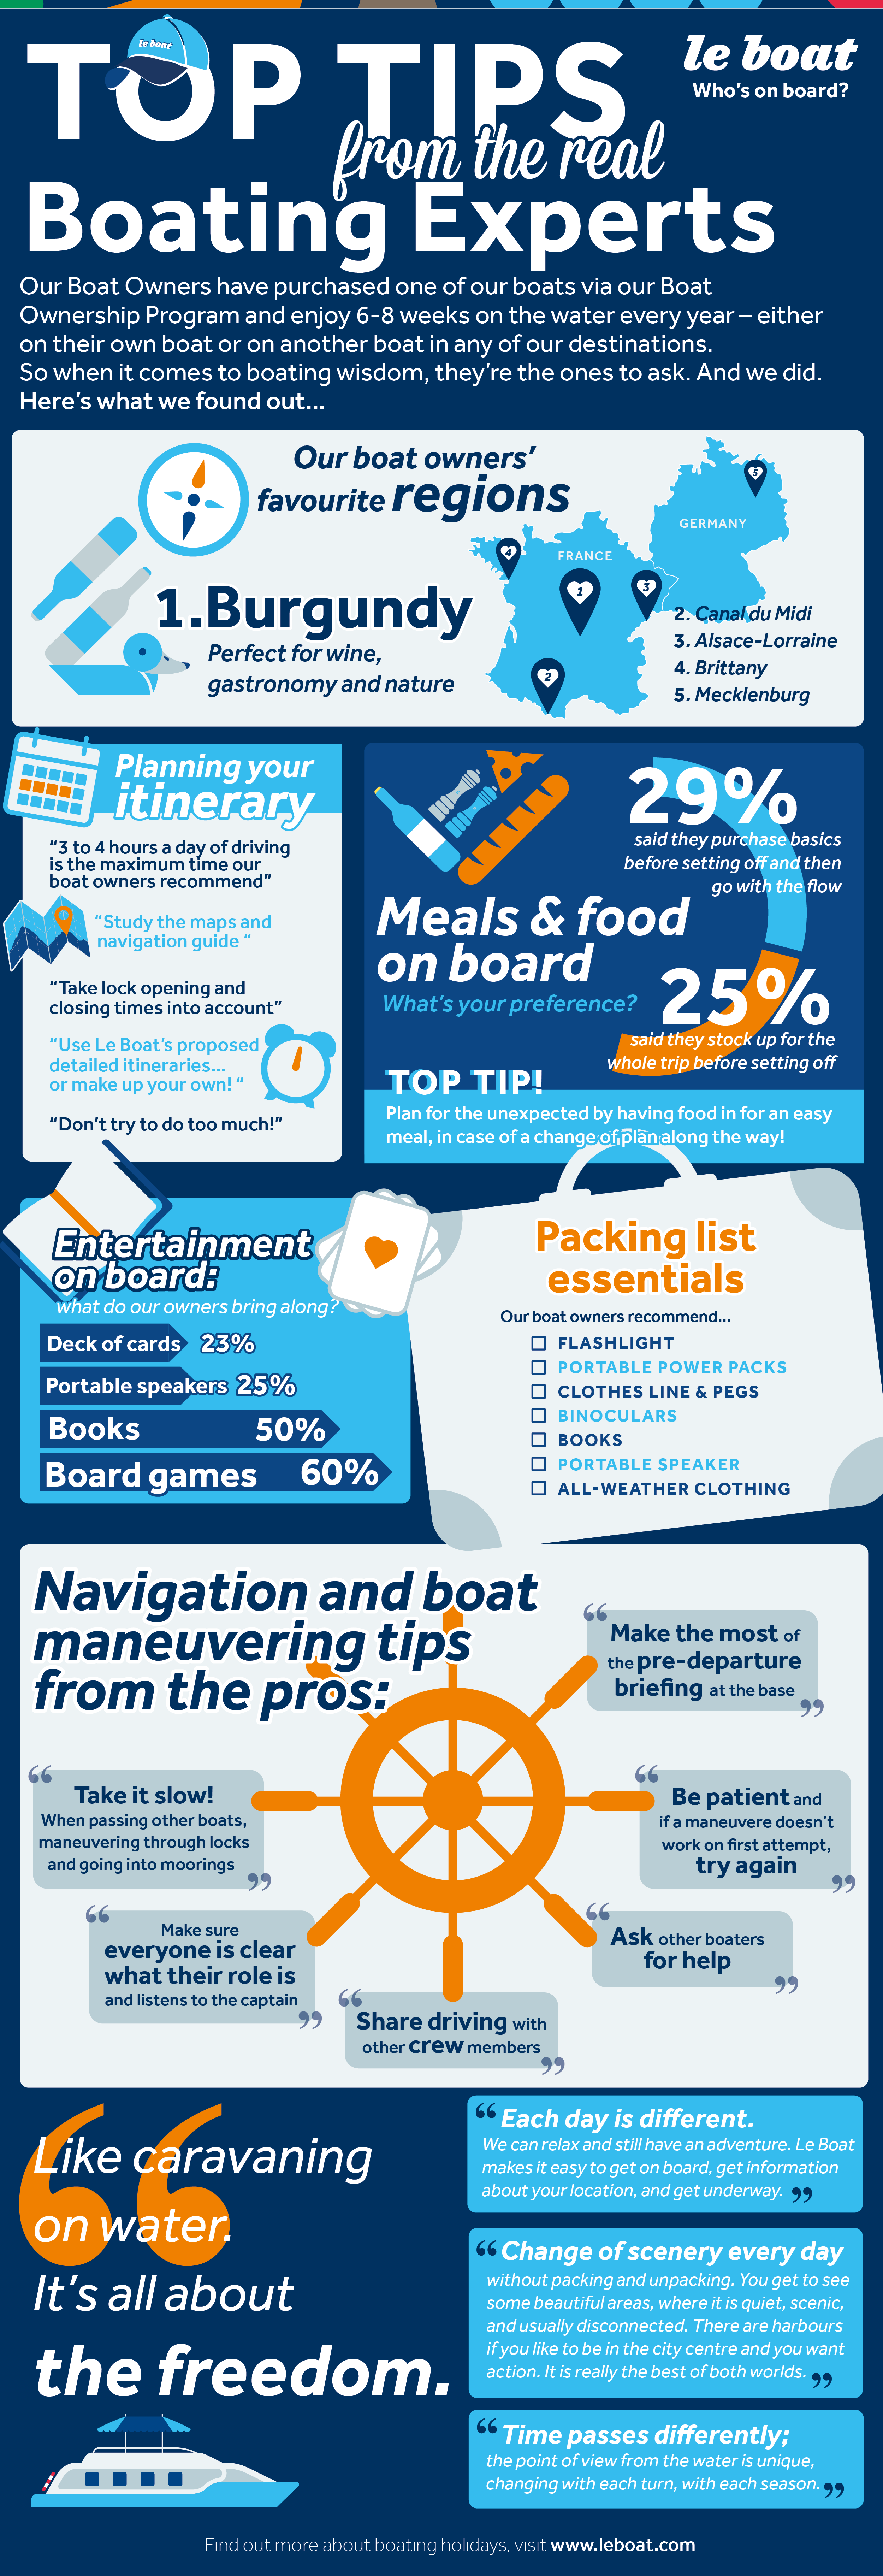 Le Boat boat owners survey infographic